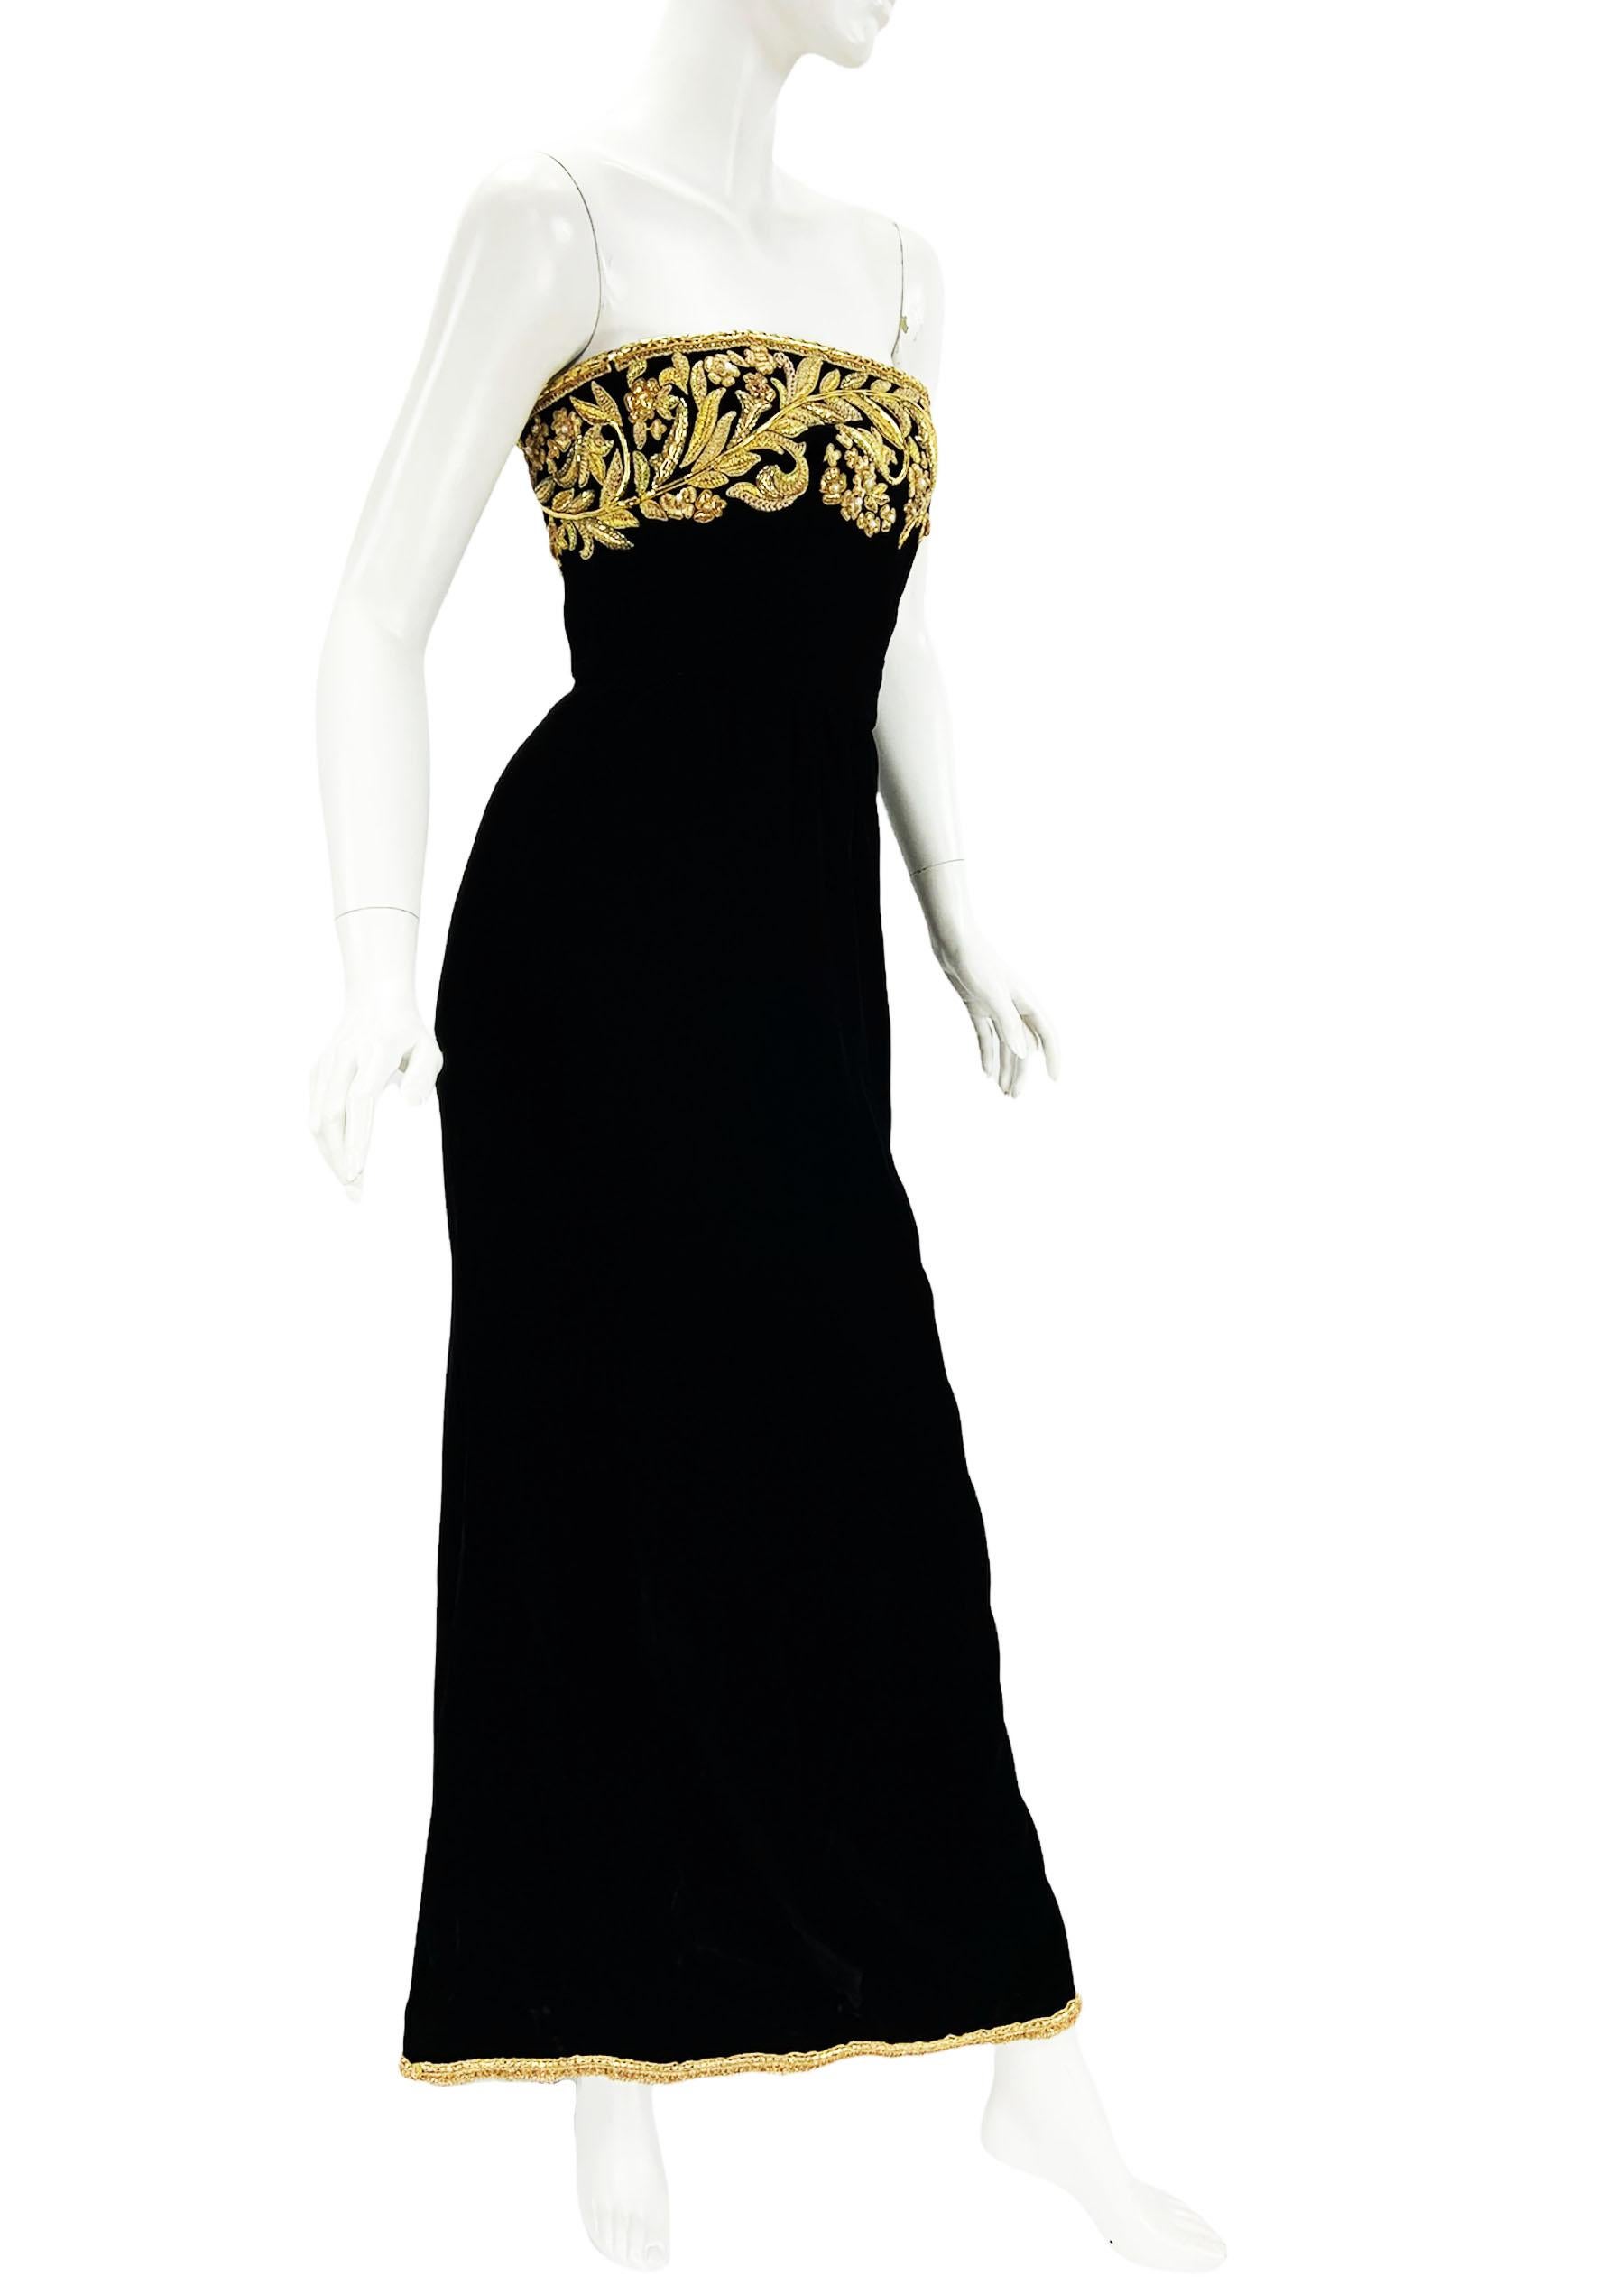 Vintage Oscar De La Renta Black Velvet Embellished Maxi Dress Gown with Exquisite Embroidery
Designer size - US 6 ( please check measurements)
Timeless Classy Black Velvet Embellished with the Rich Gold-Tone Metallic Threads, Tube Beads and White